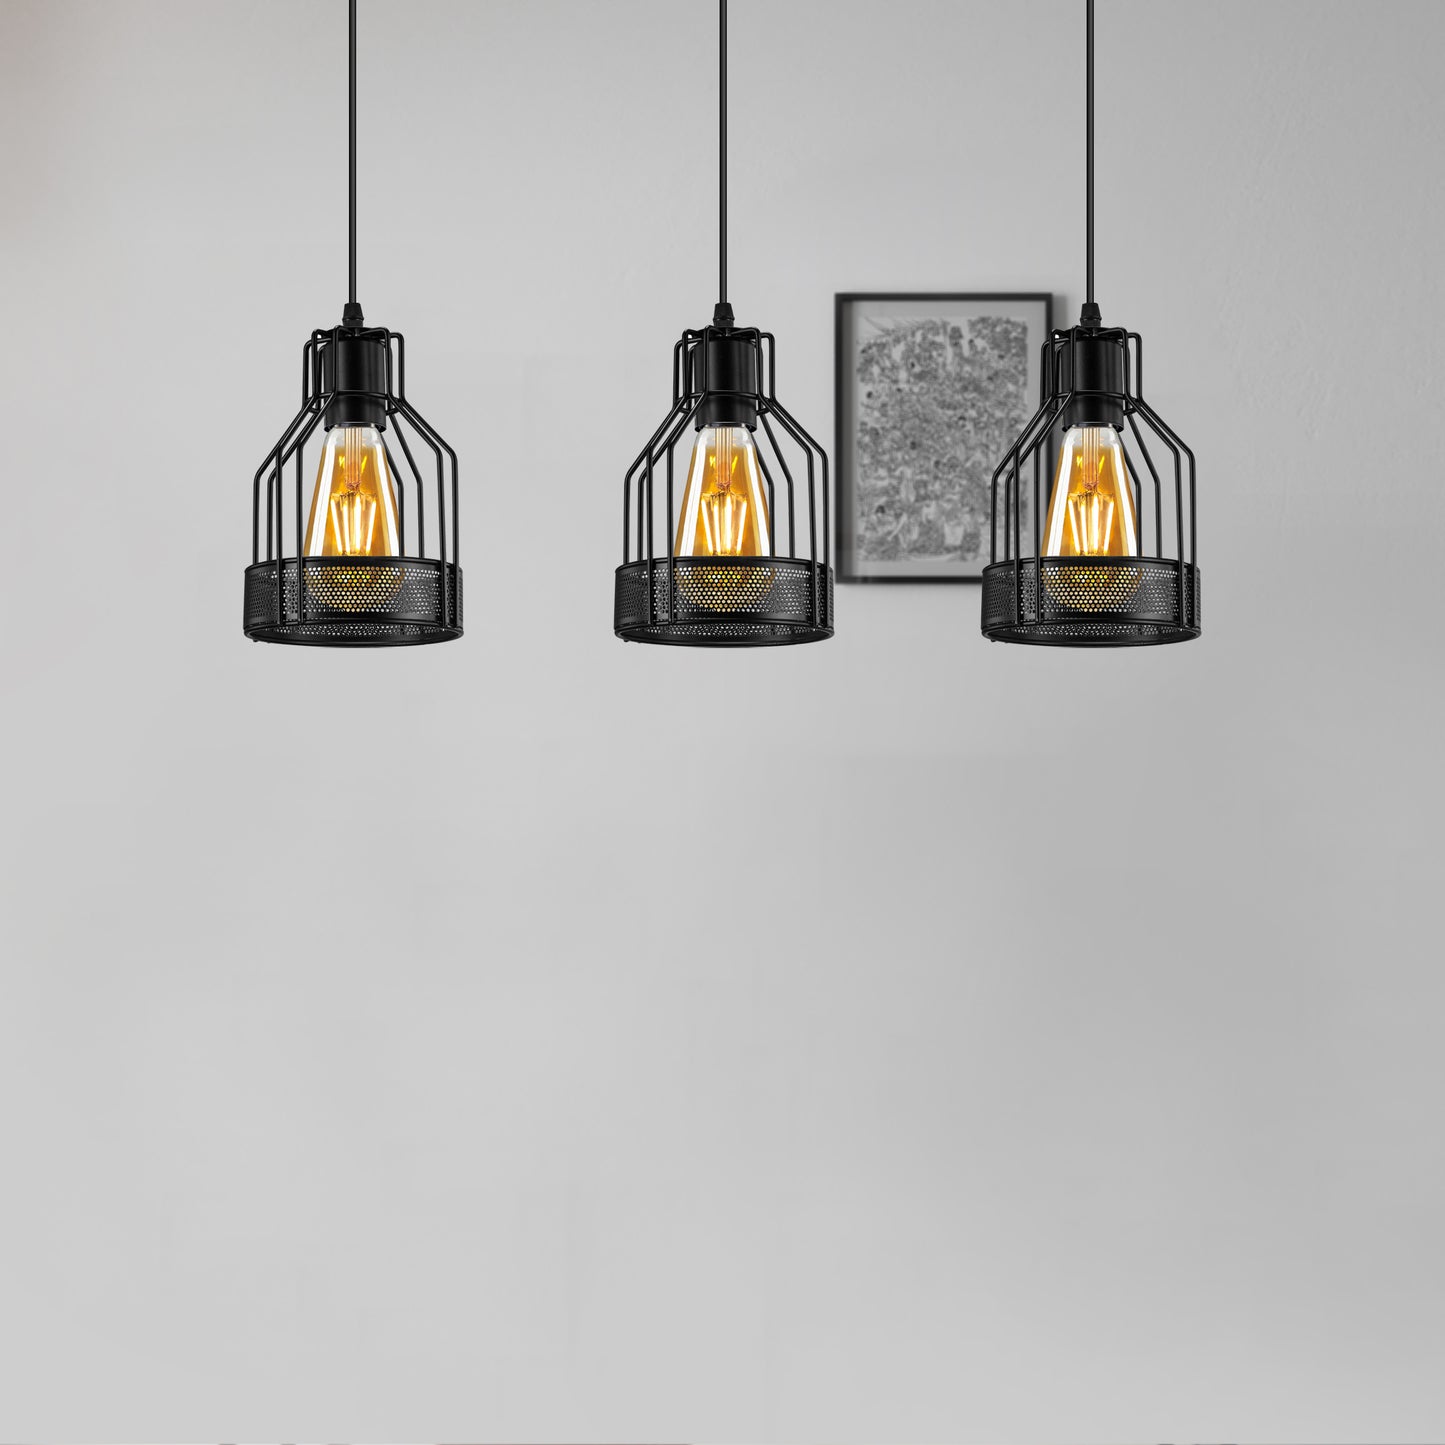 3 Way Ceiling Pendant Light Cage Rectangle Light Fitting